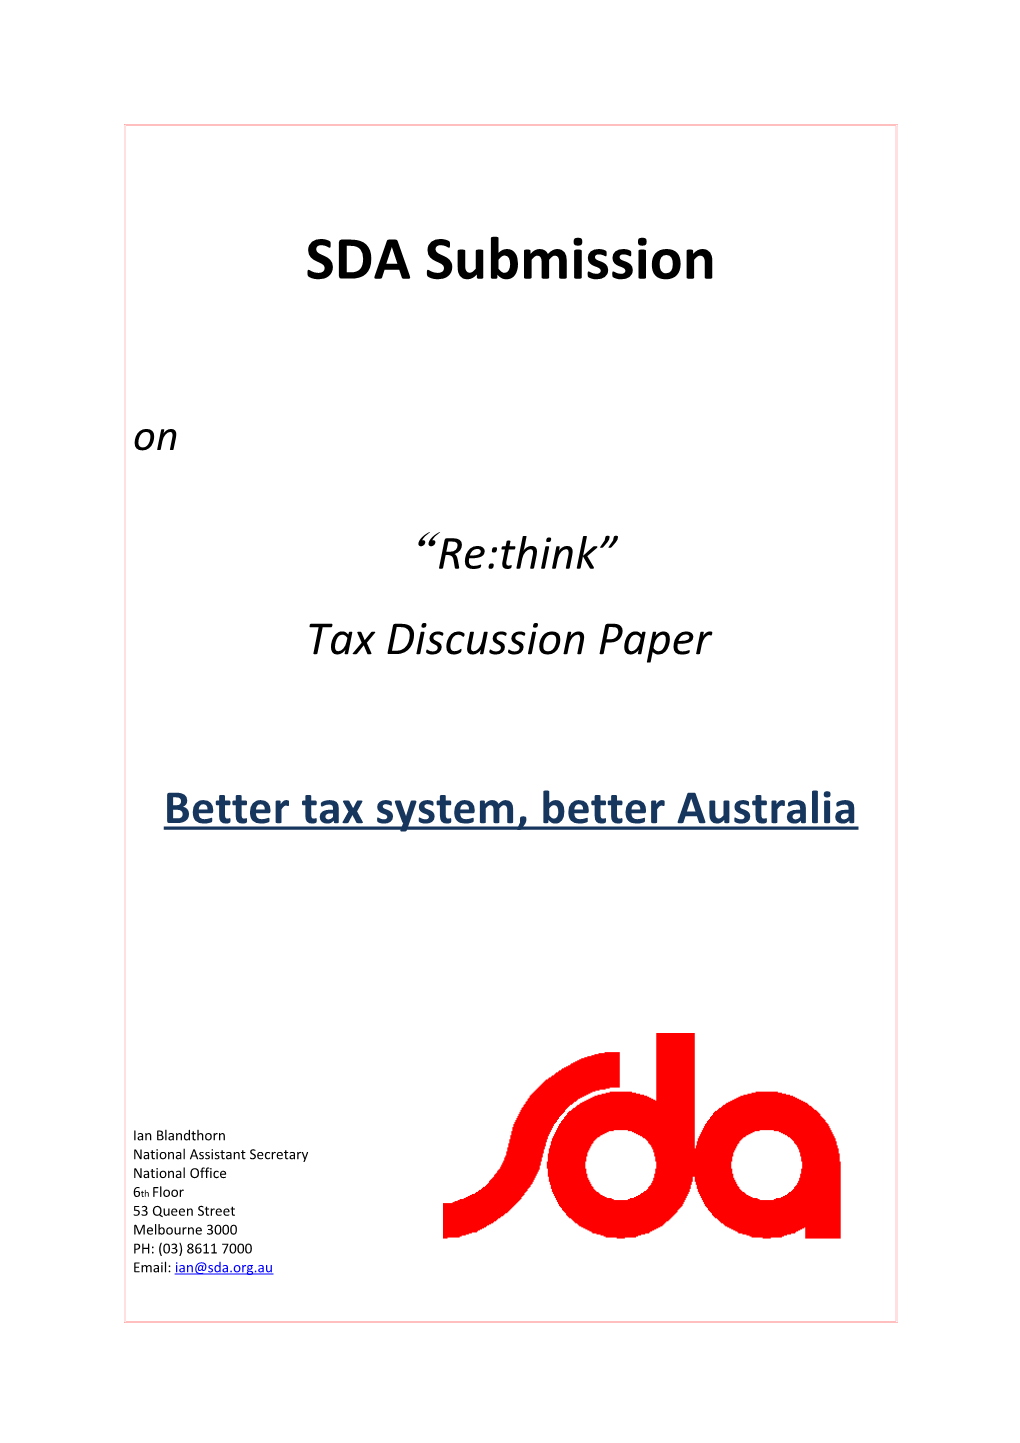 Shop, Distributive and Allied Employees Association - Submission to the Tax Discussion Paper